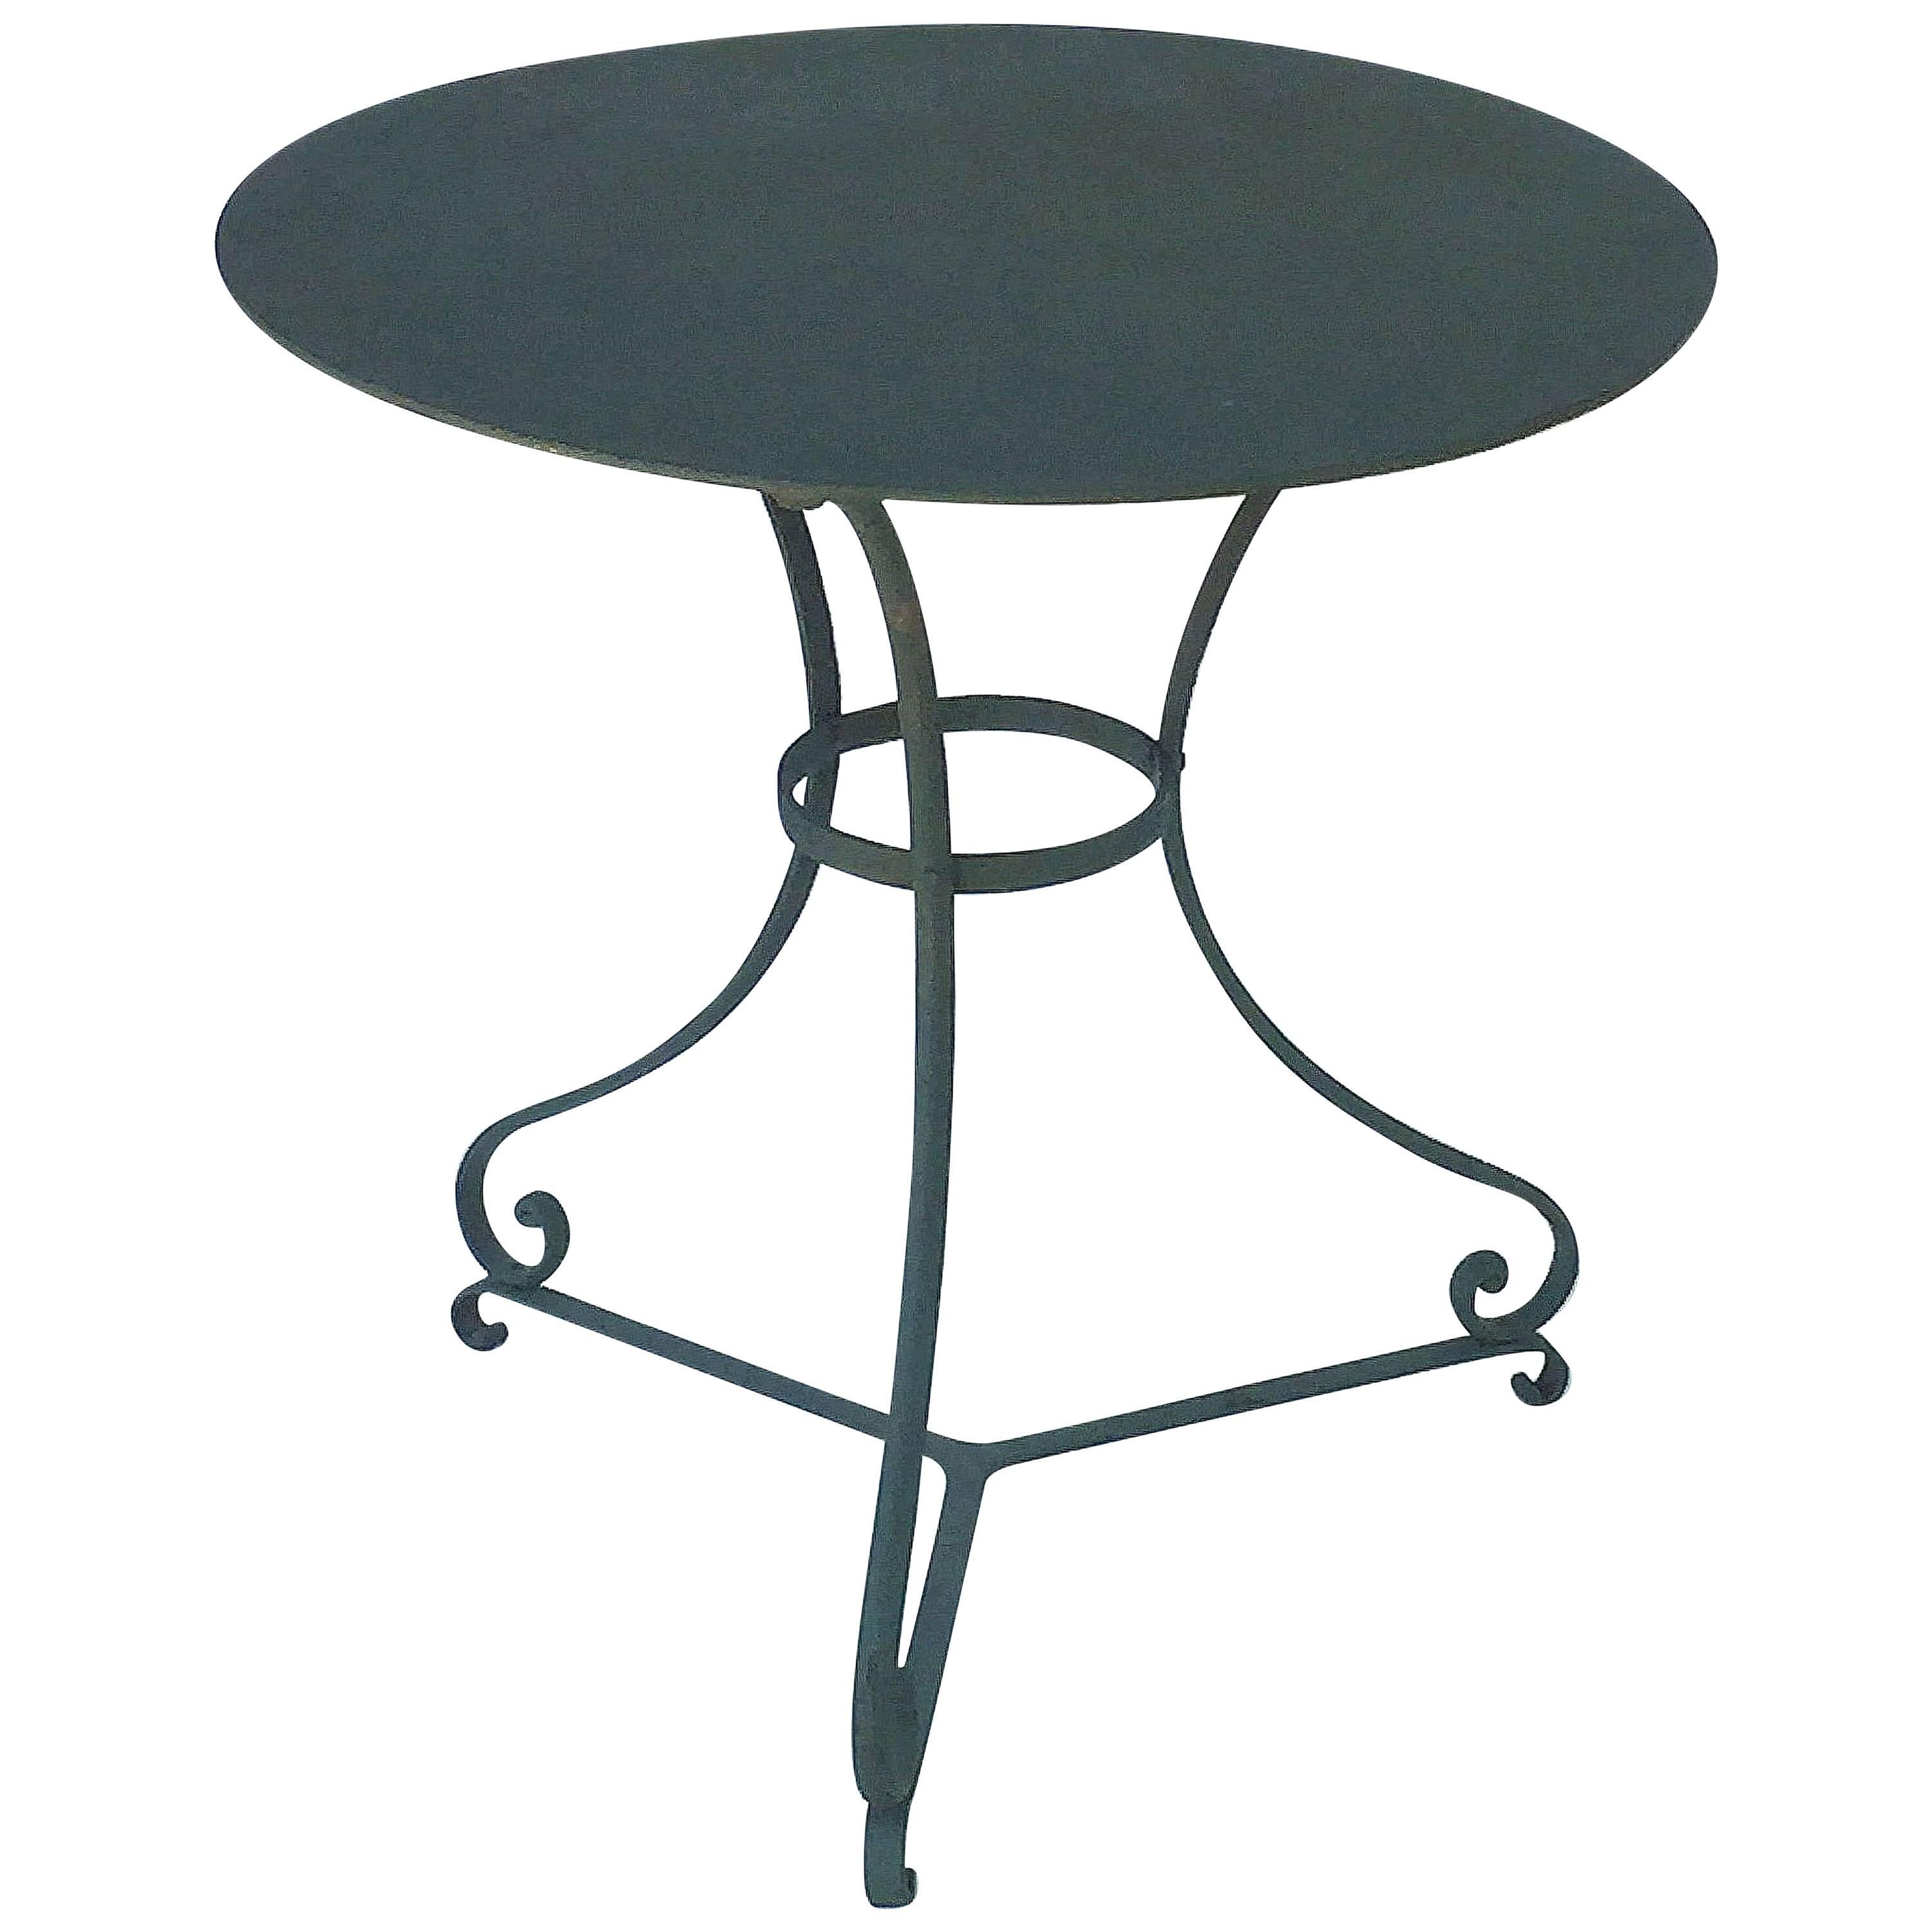 French Green-Painted Round Café or Bistro Pub Table